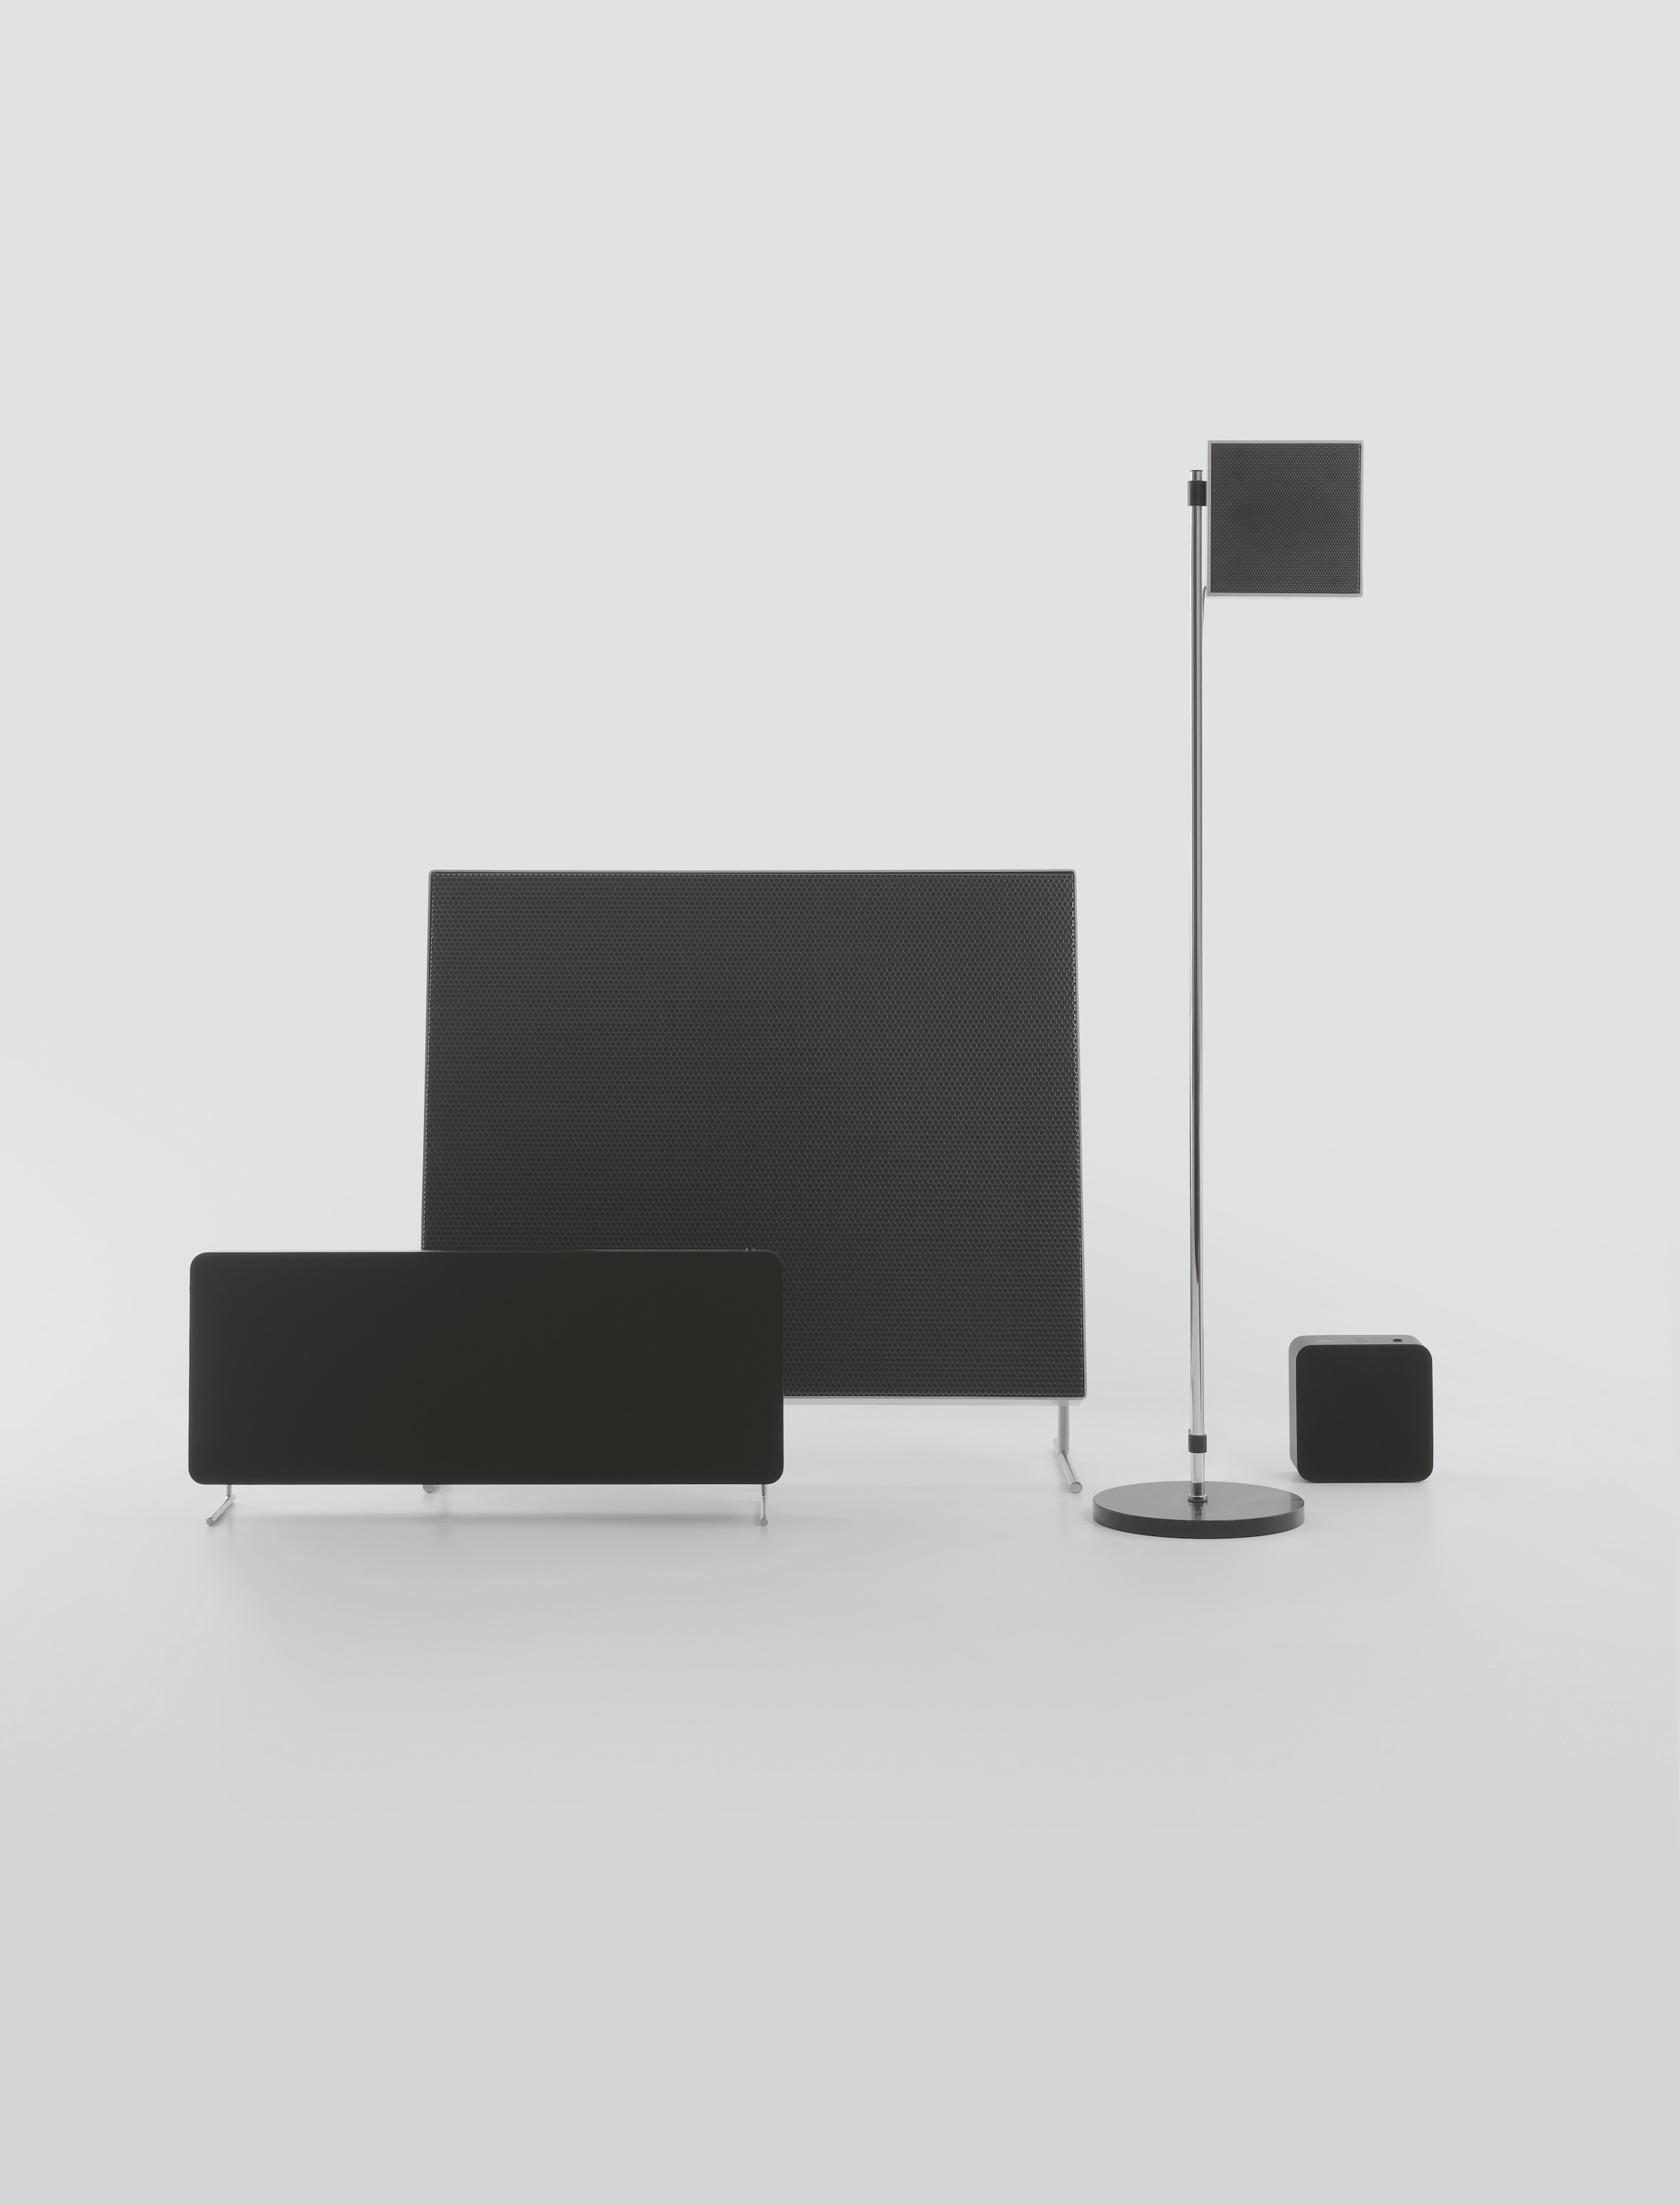 Four different shaped and sized black Braun smart speakers against a white background